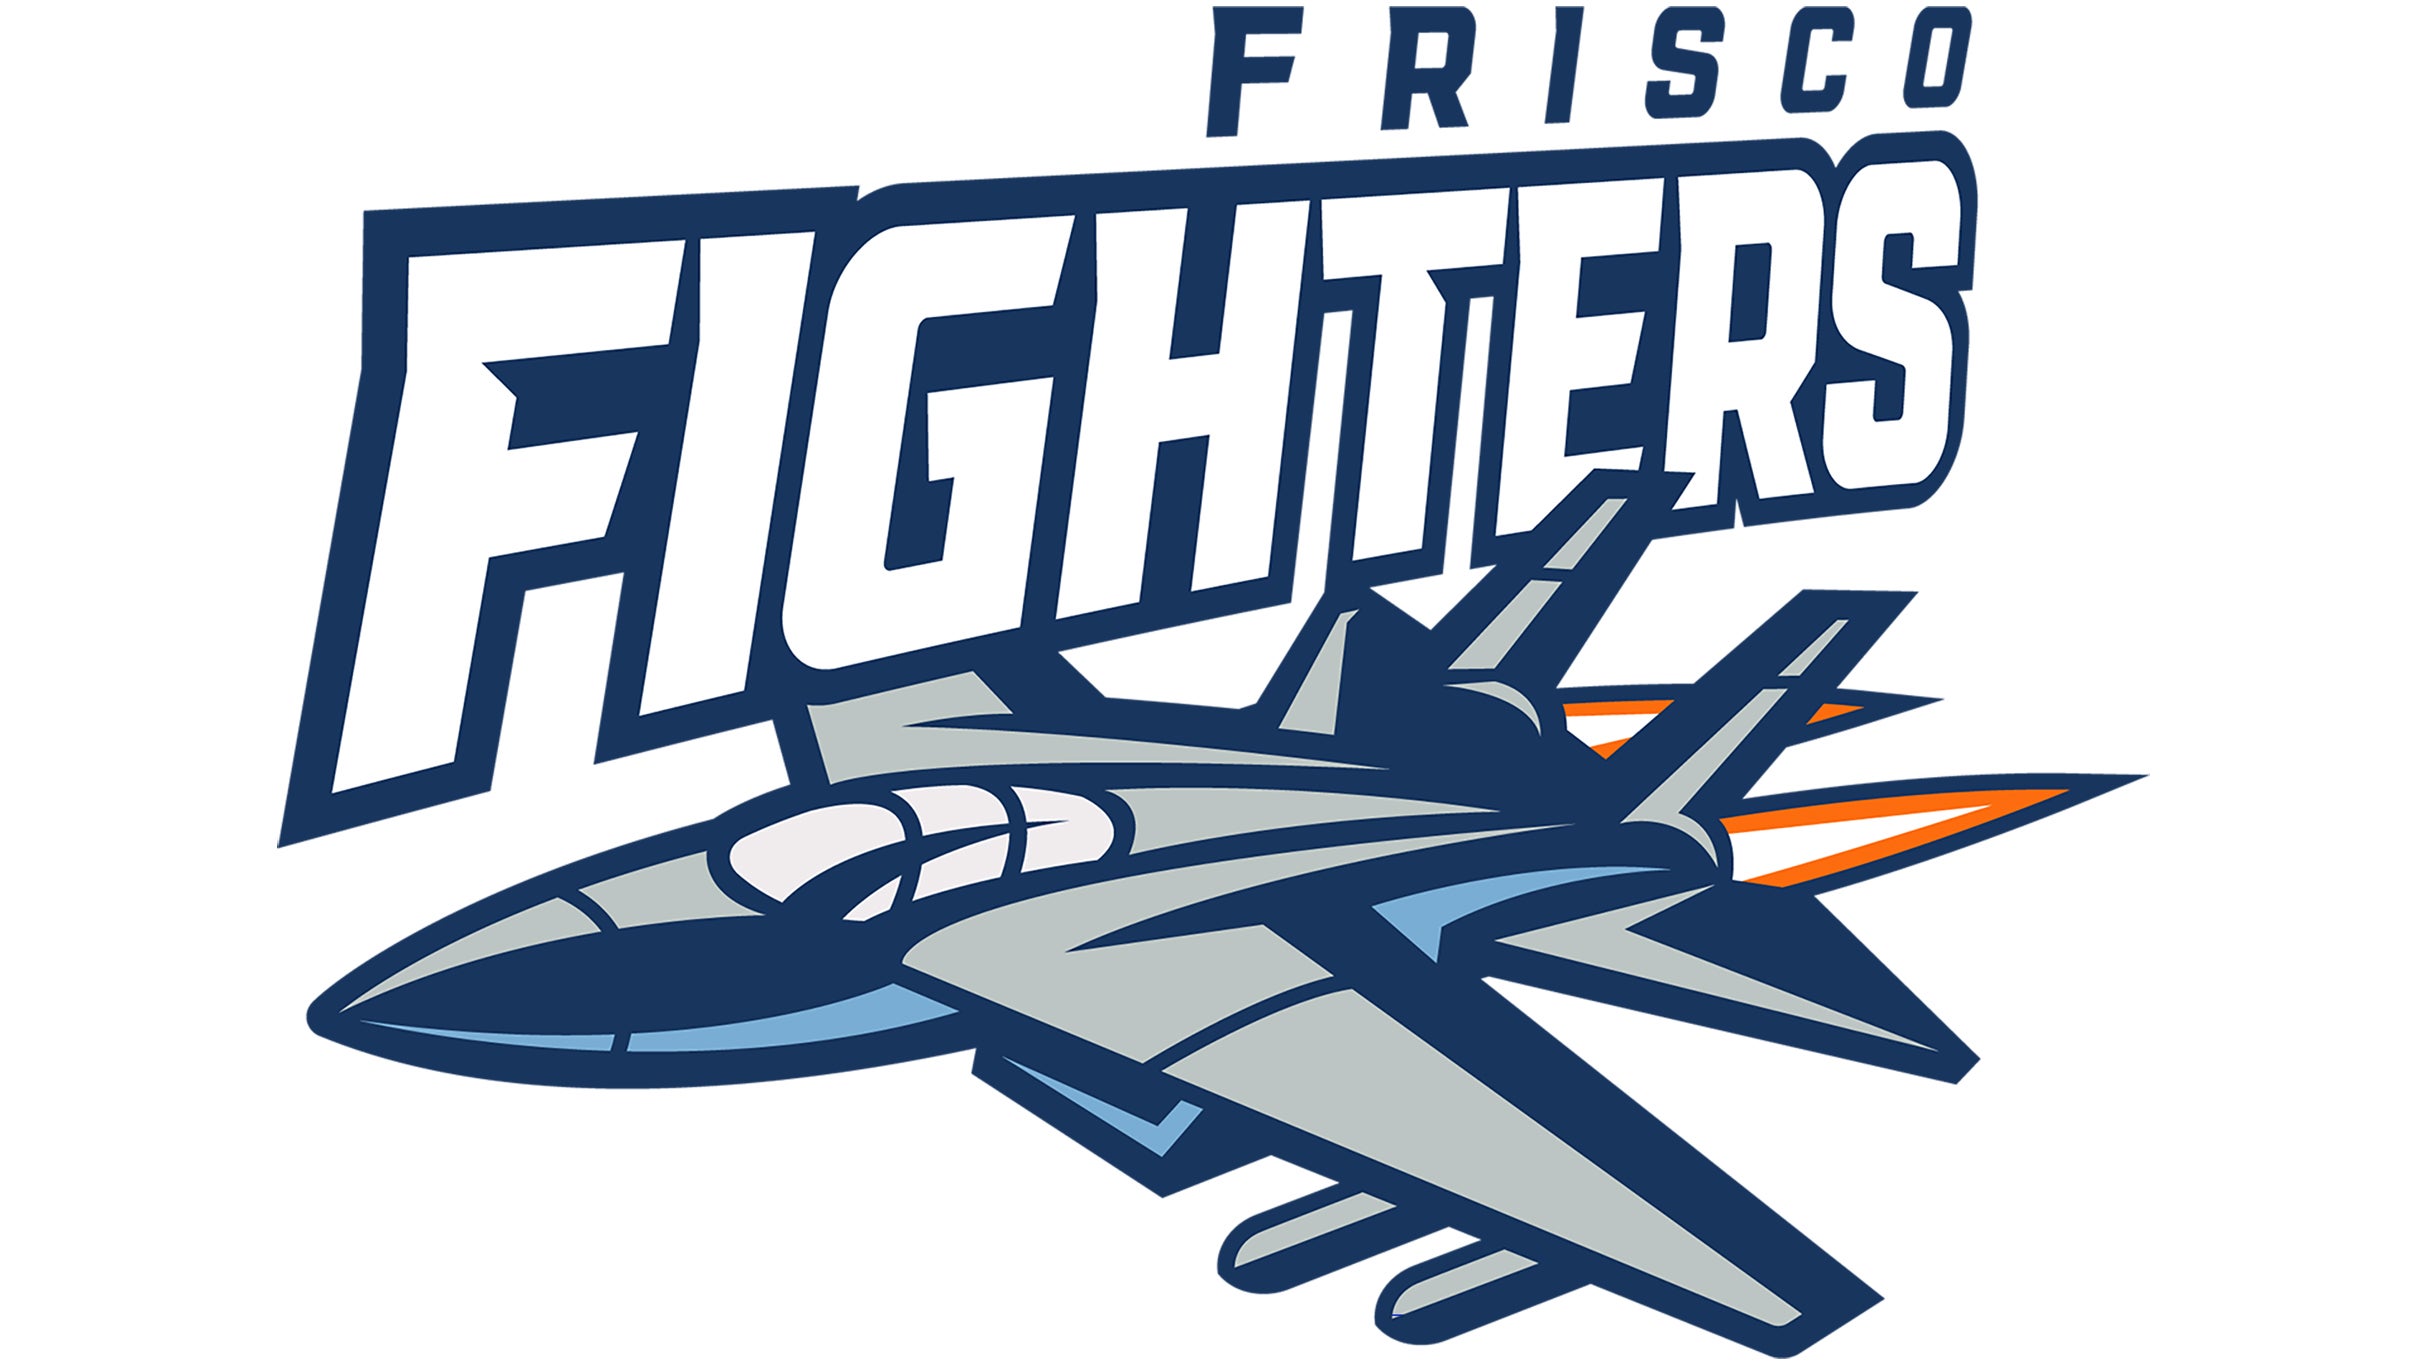 Frisco Fighters vs. Iowa Barnstormers at Hard Rock Live